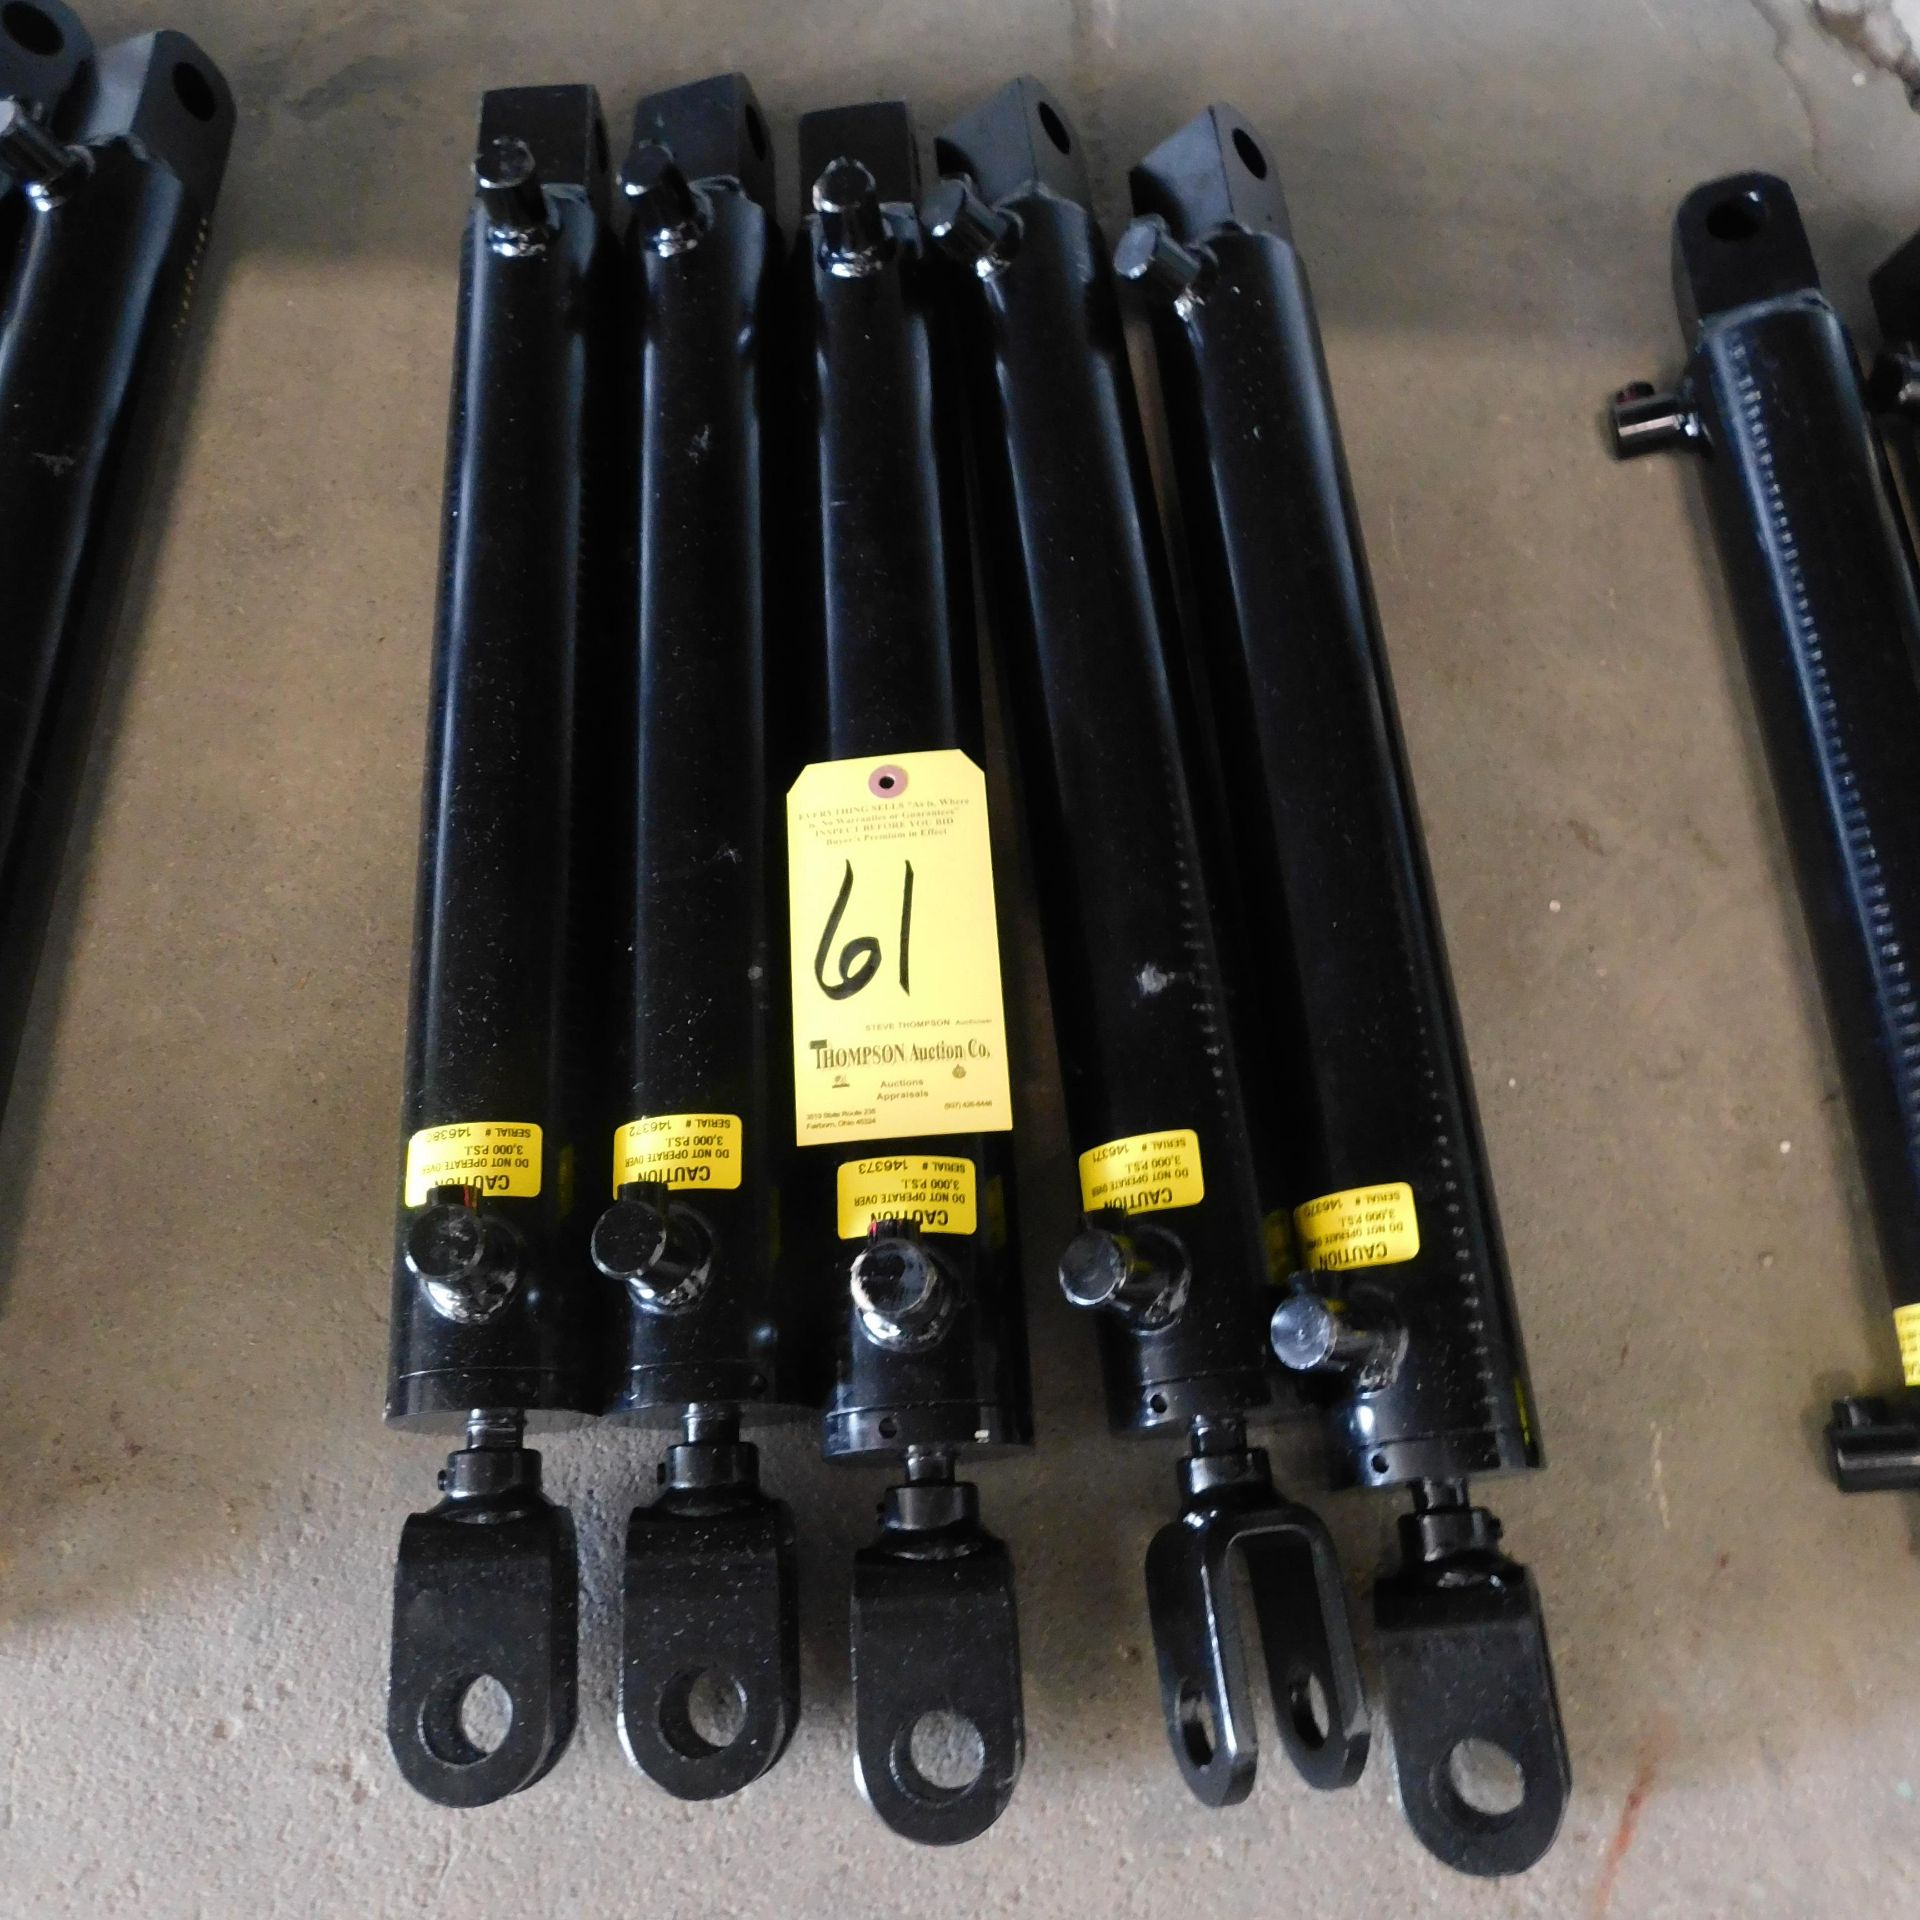 (3) Best Metal Prducts Double Acting Hydraulic Cylinders, Part #A-250-16.00 TL, 3,000 Max. PSI,